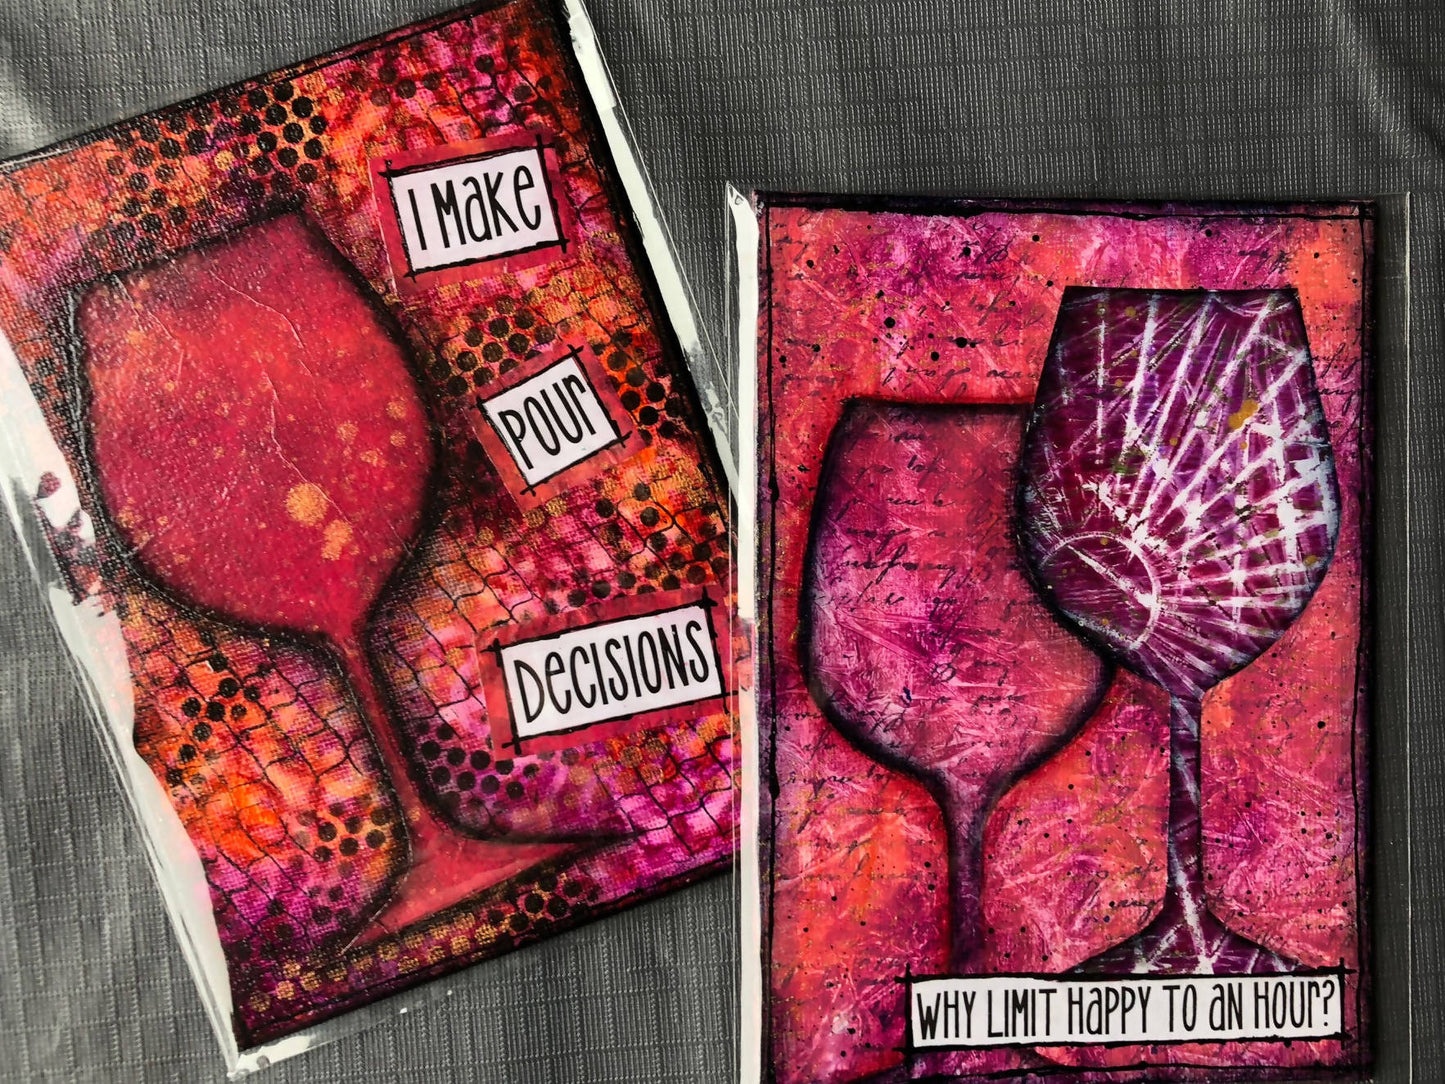 Mixed Media Creations Digital Sentiment Pack - Wine About It